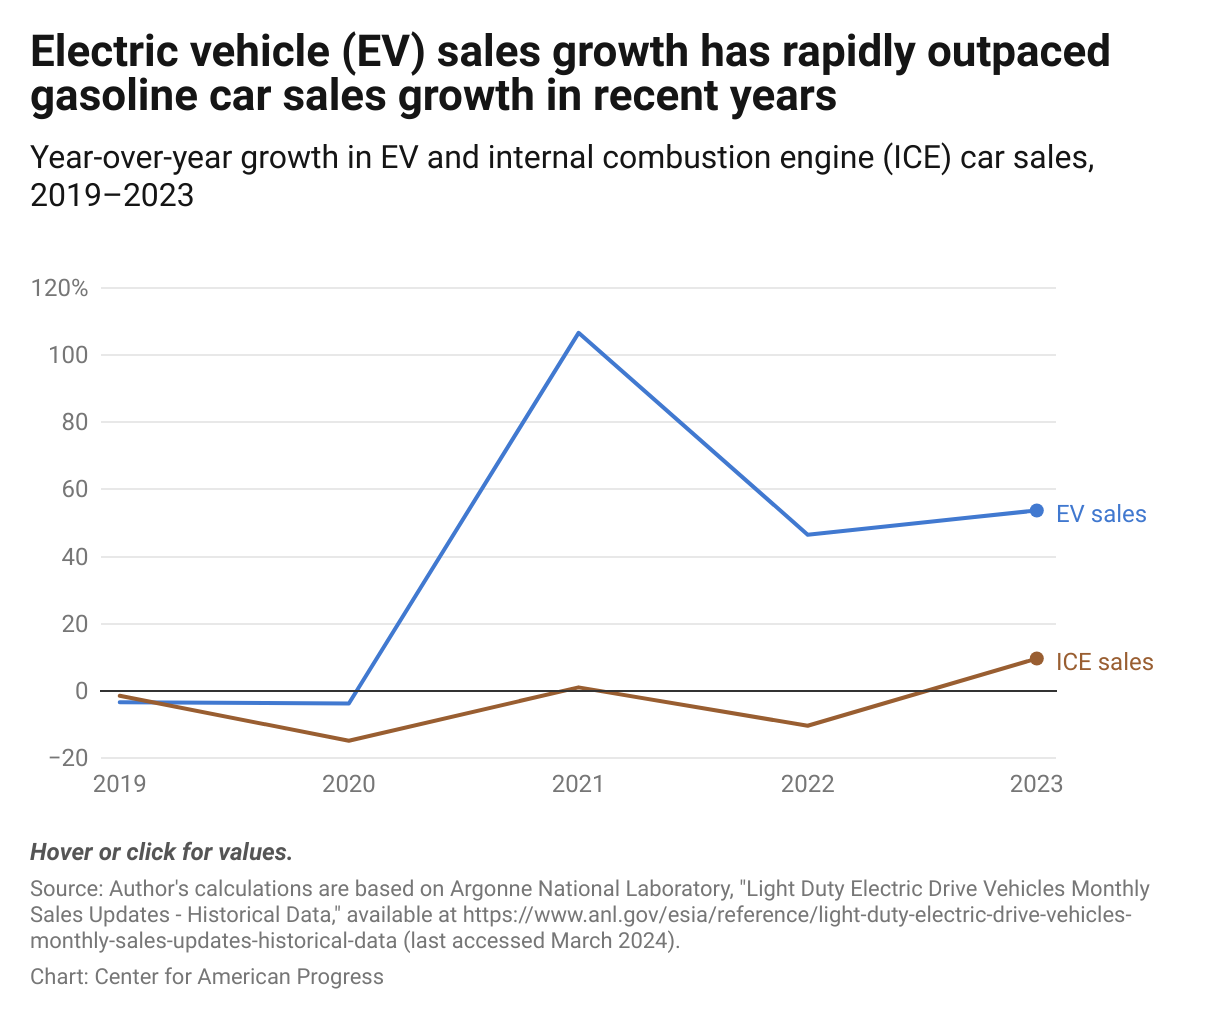 Graphical representation of year-over-year growth in U.S. electric vehicle and internal combustion engine vehicle sales from 2019 to 2023, showing that sales for gasoline-powered cars increased by only a maximum of 9.84 percent, achieved from 2022 to 2023, while electric vehicle sales grew 50.73 percent. Electric vehicle sales grew most rapidly between 2020 and 2021, when they increased by 106.64 percent.